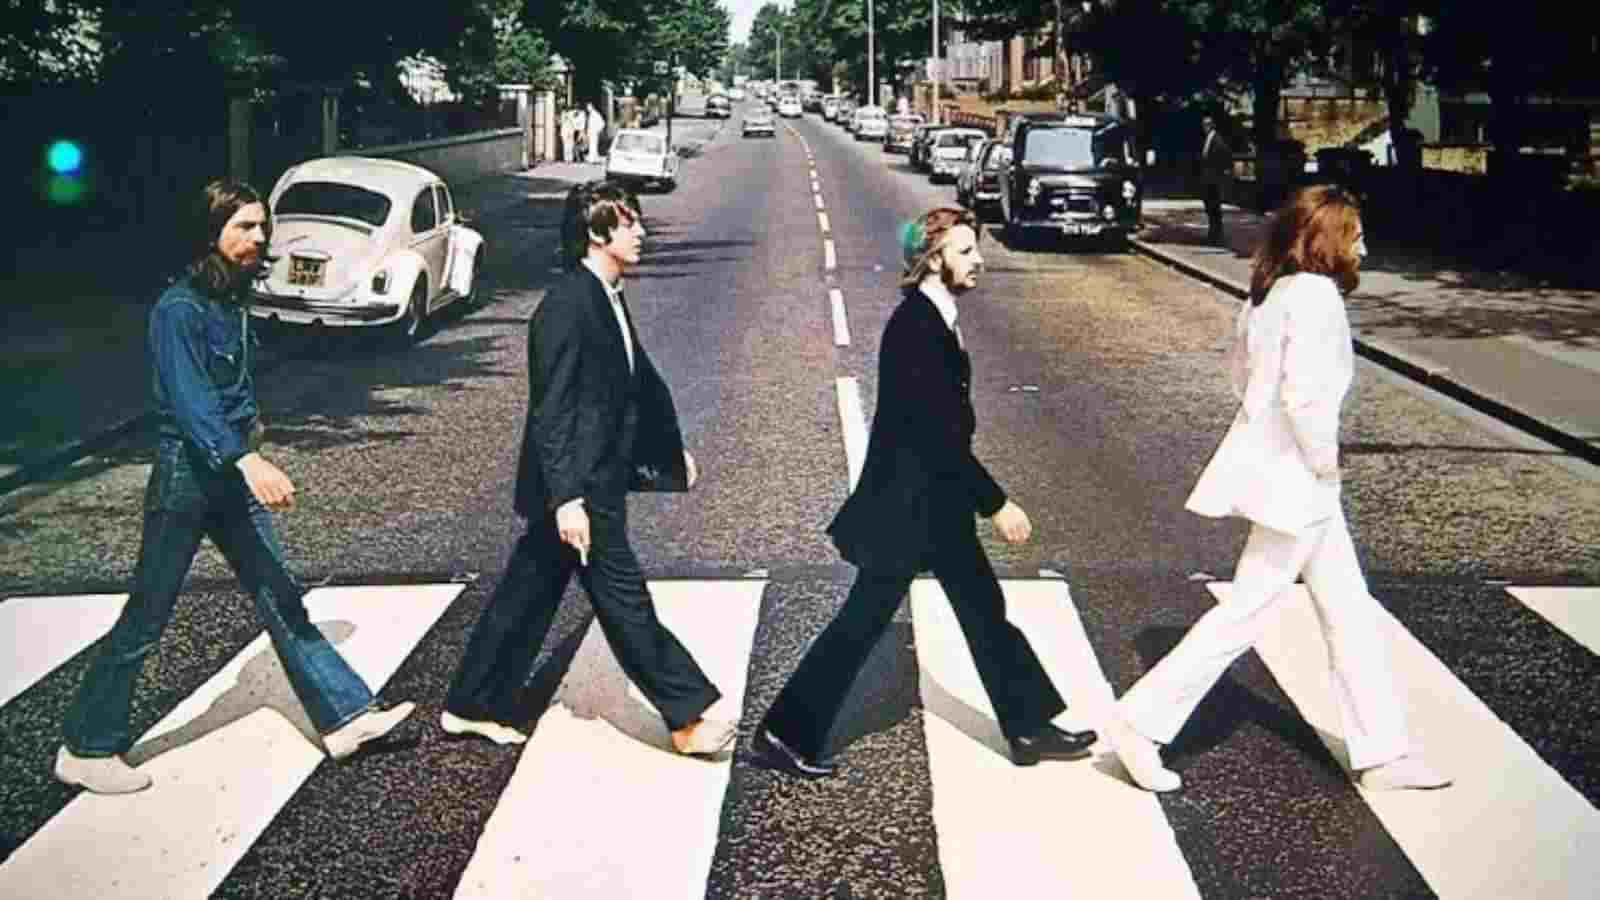 The Beatles' Abbey Road